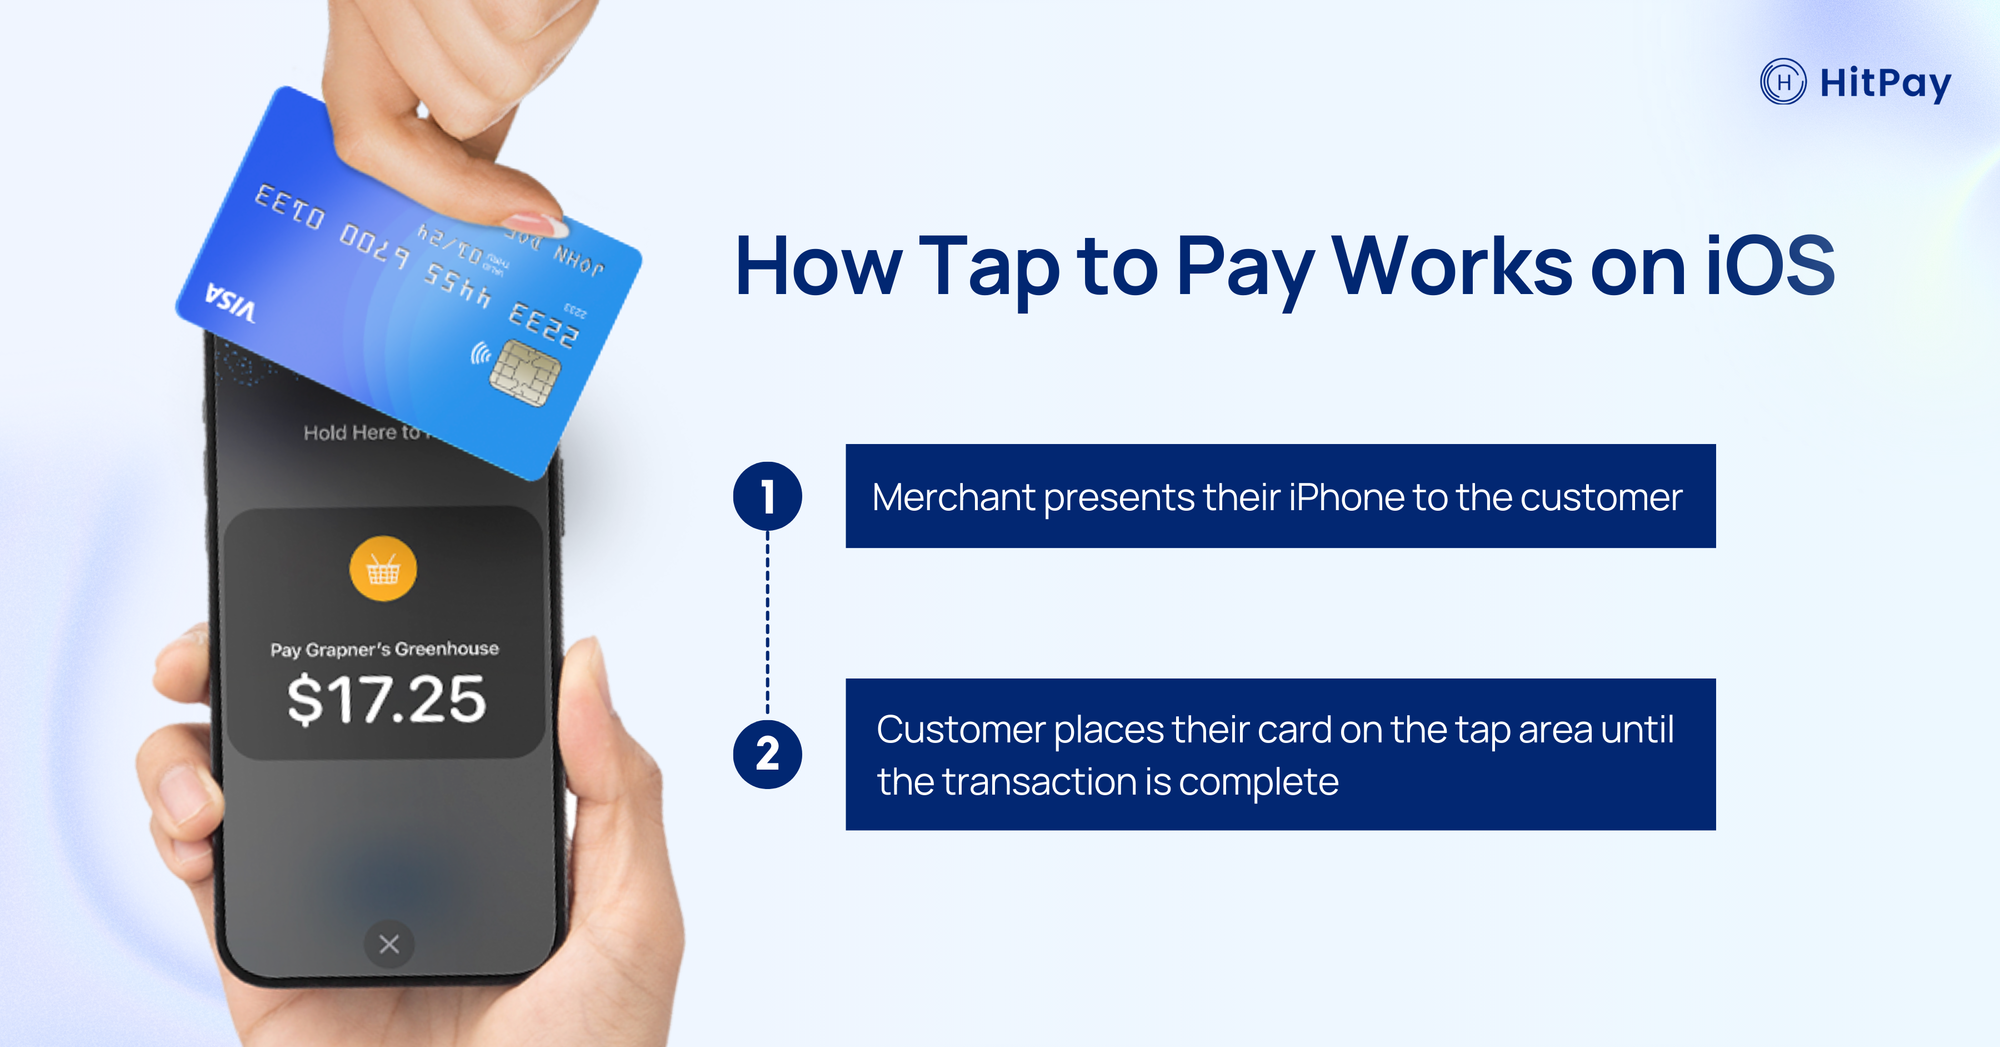 HitPay Launches Tap to Pay on iOS in Australia, France, the UK, and the US